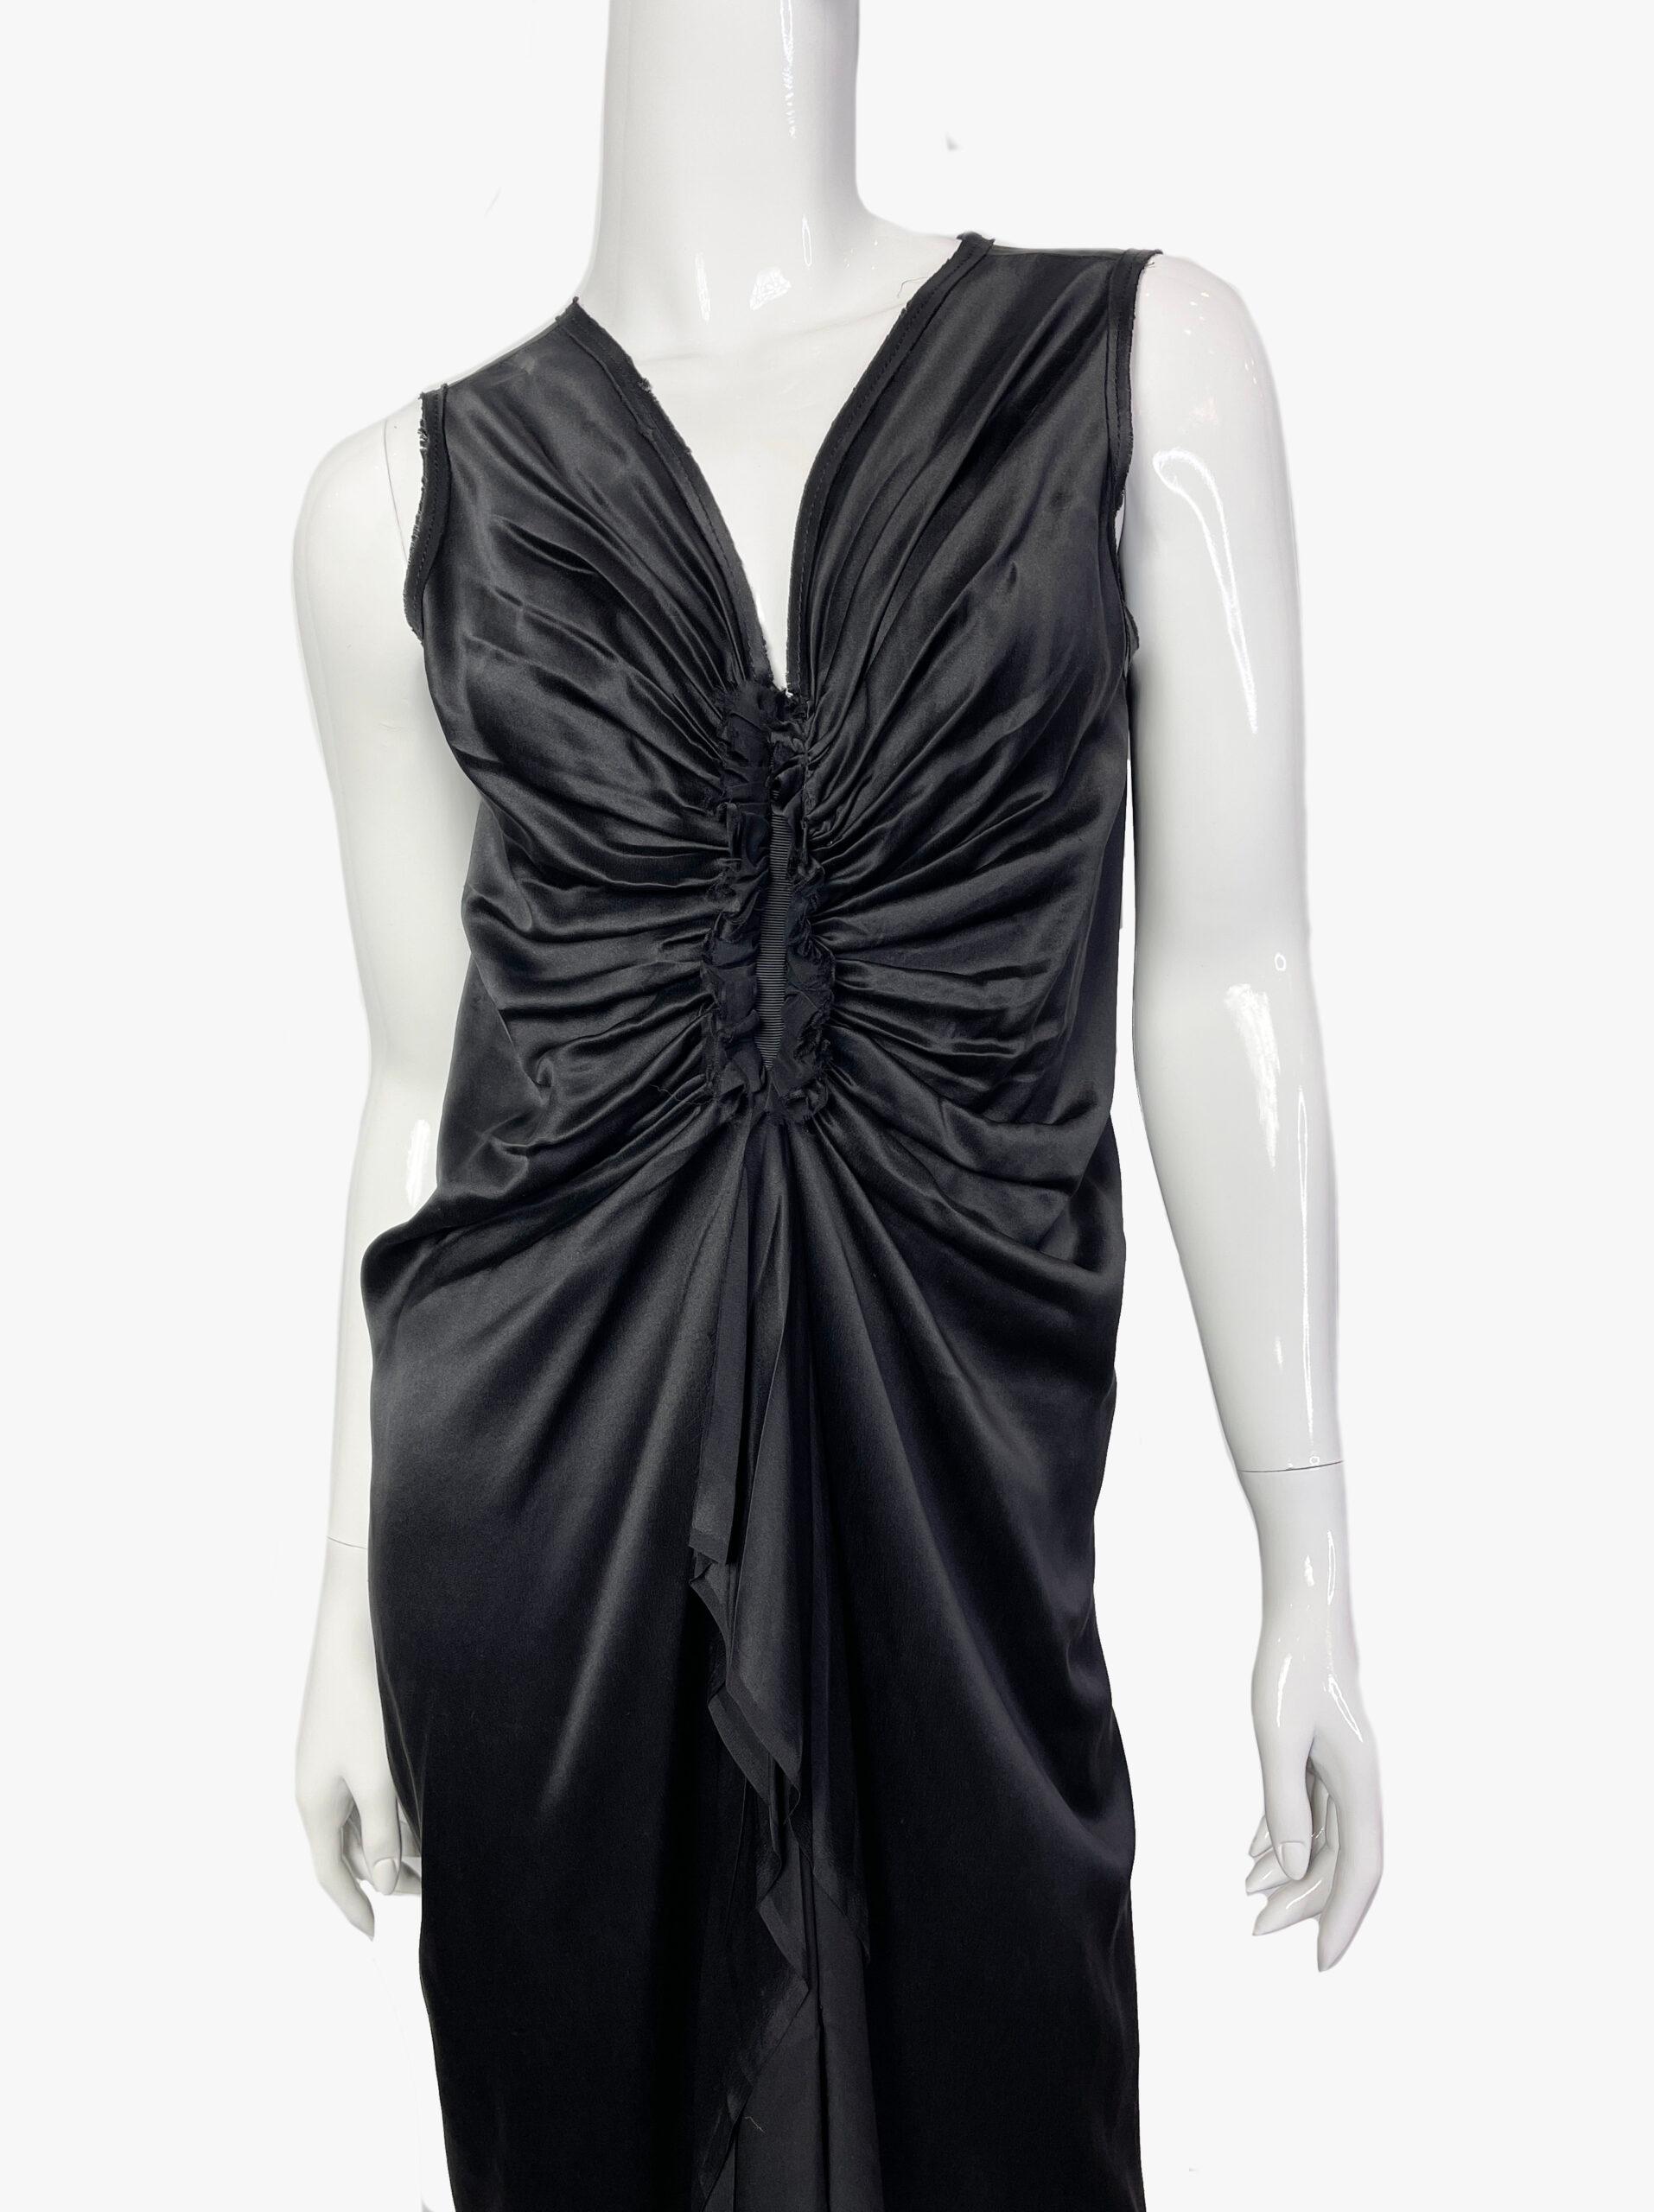 Lanvin silk black sleeveless dress with drapery on the chest.
2007 collection.
Fabric: 100% silk
Size: 40 FR (M-L)
Condition: Perfect 
.......Additional information ........

- Photo might be slightly different from actual item in terms of color due